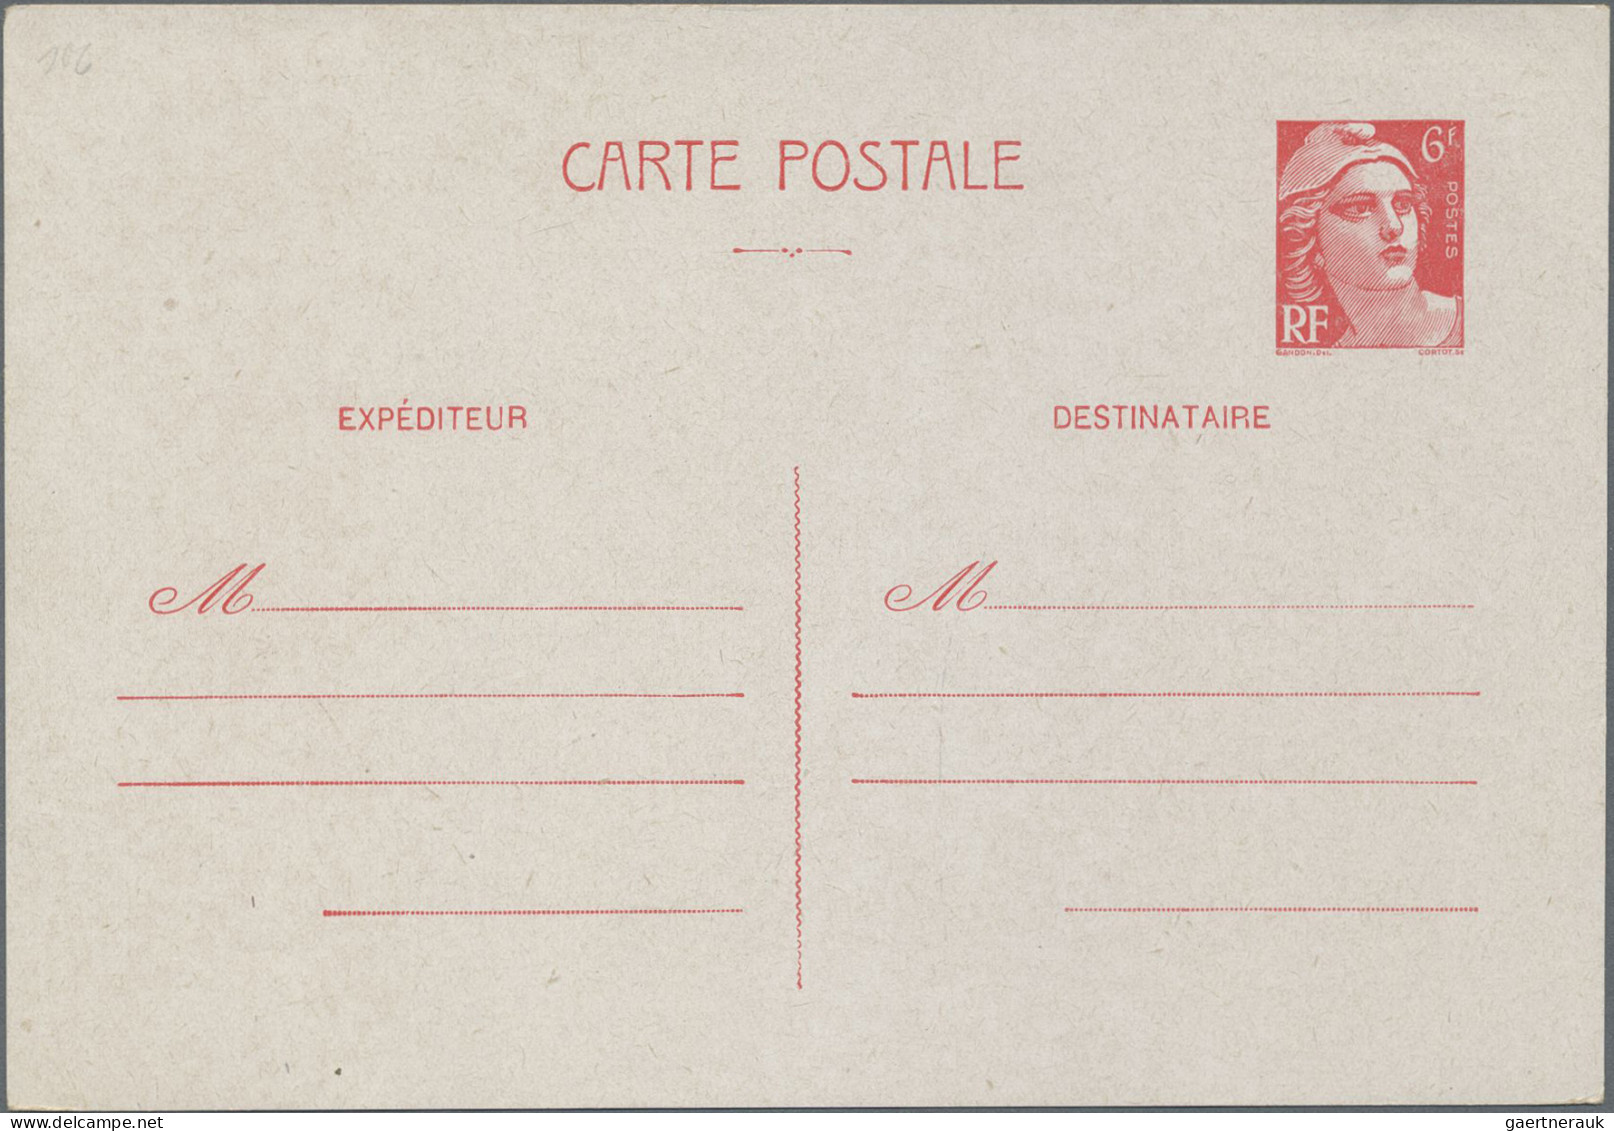 France - Postal stationery: 1927/1956, collection of 46 different unused station